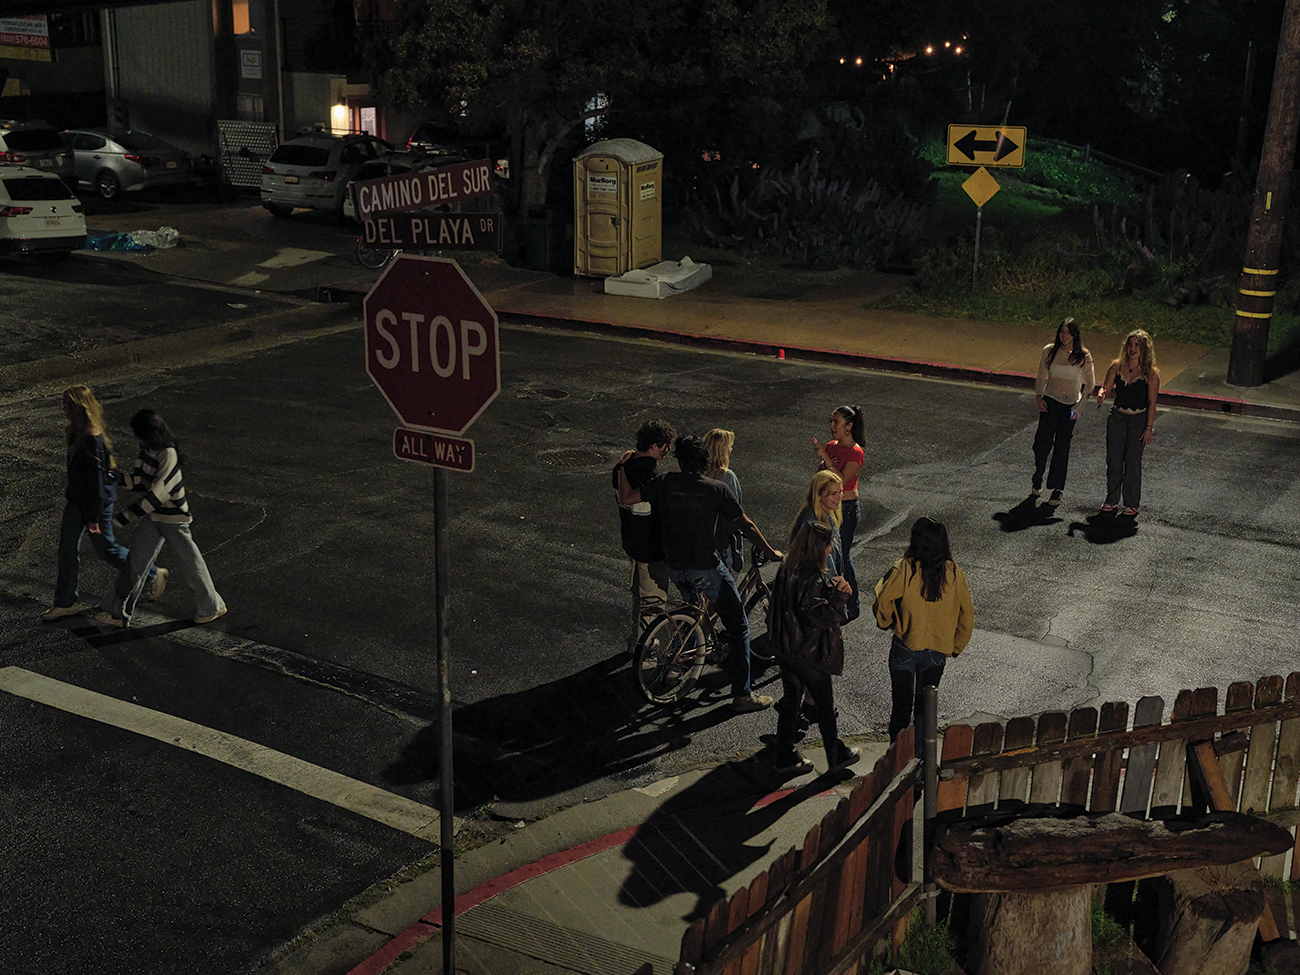 Intersection at night with people standing in the street.